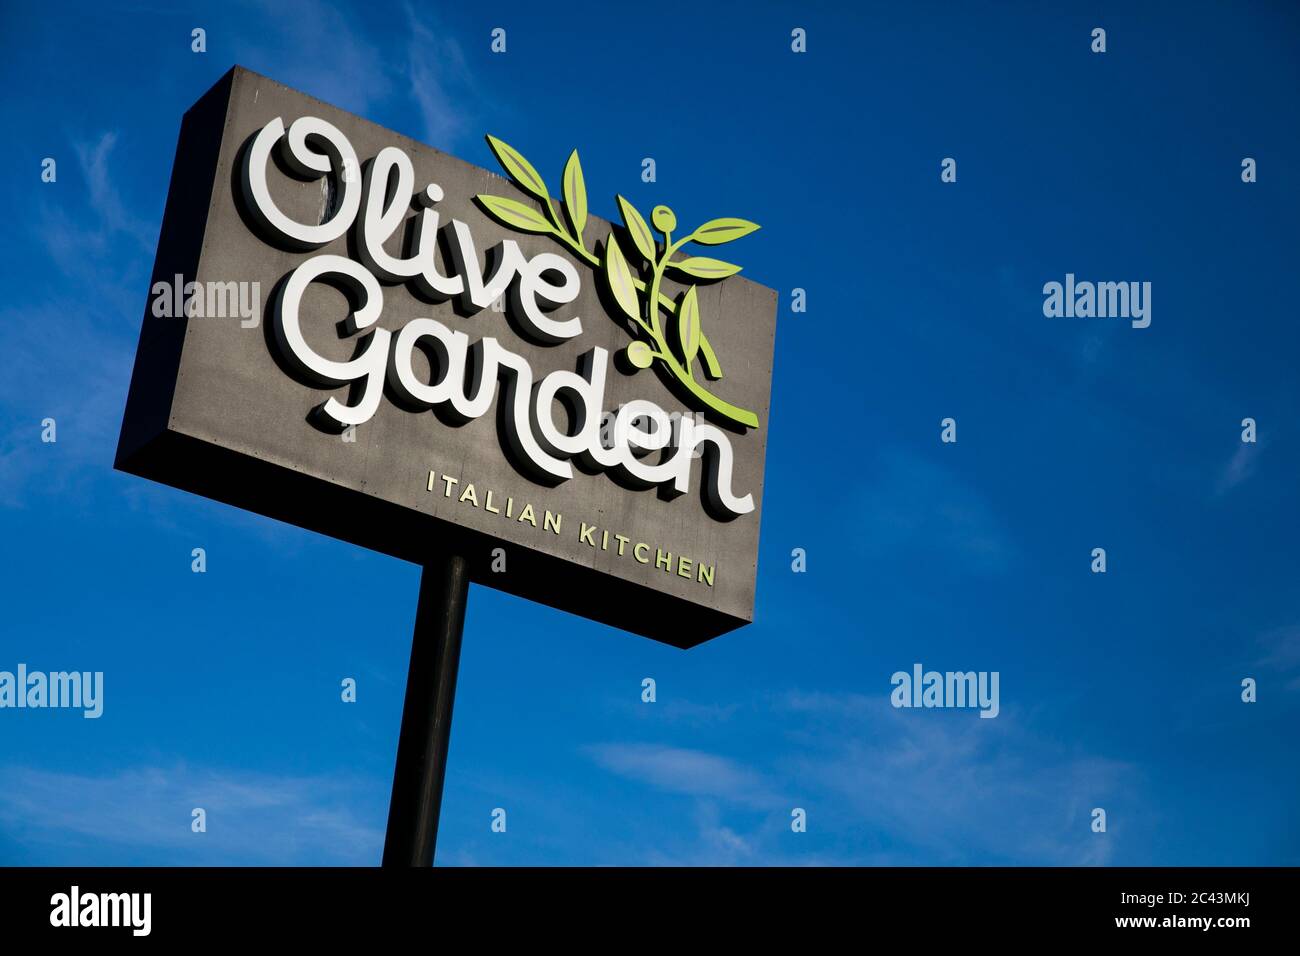 A logo sign outside of a Olive Garden restaurant location in Hagerstown, Maryland on June 10, 2020. Stock Photo